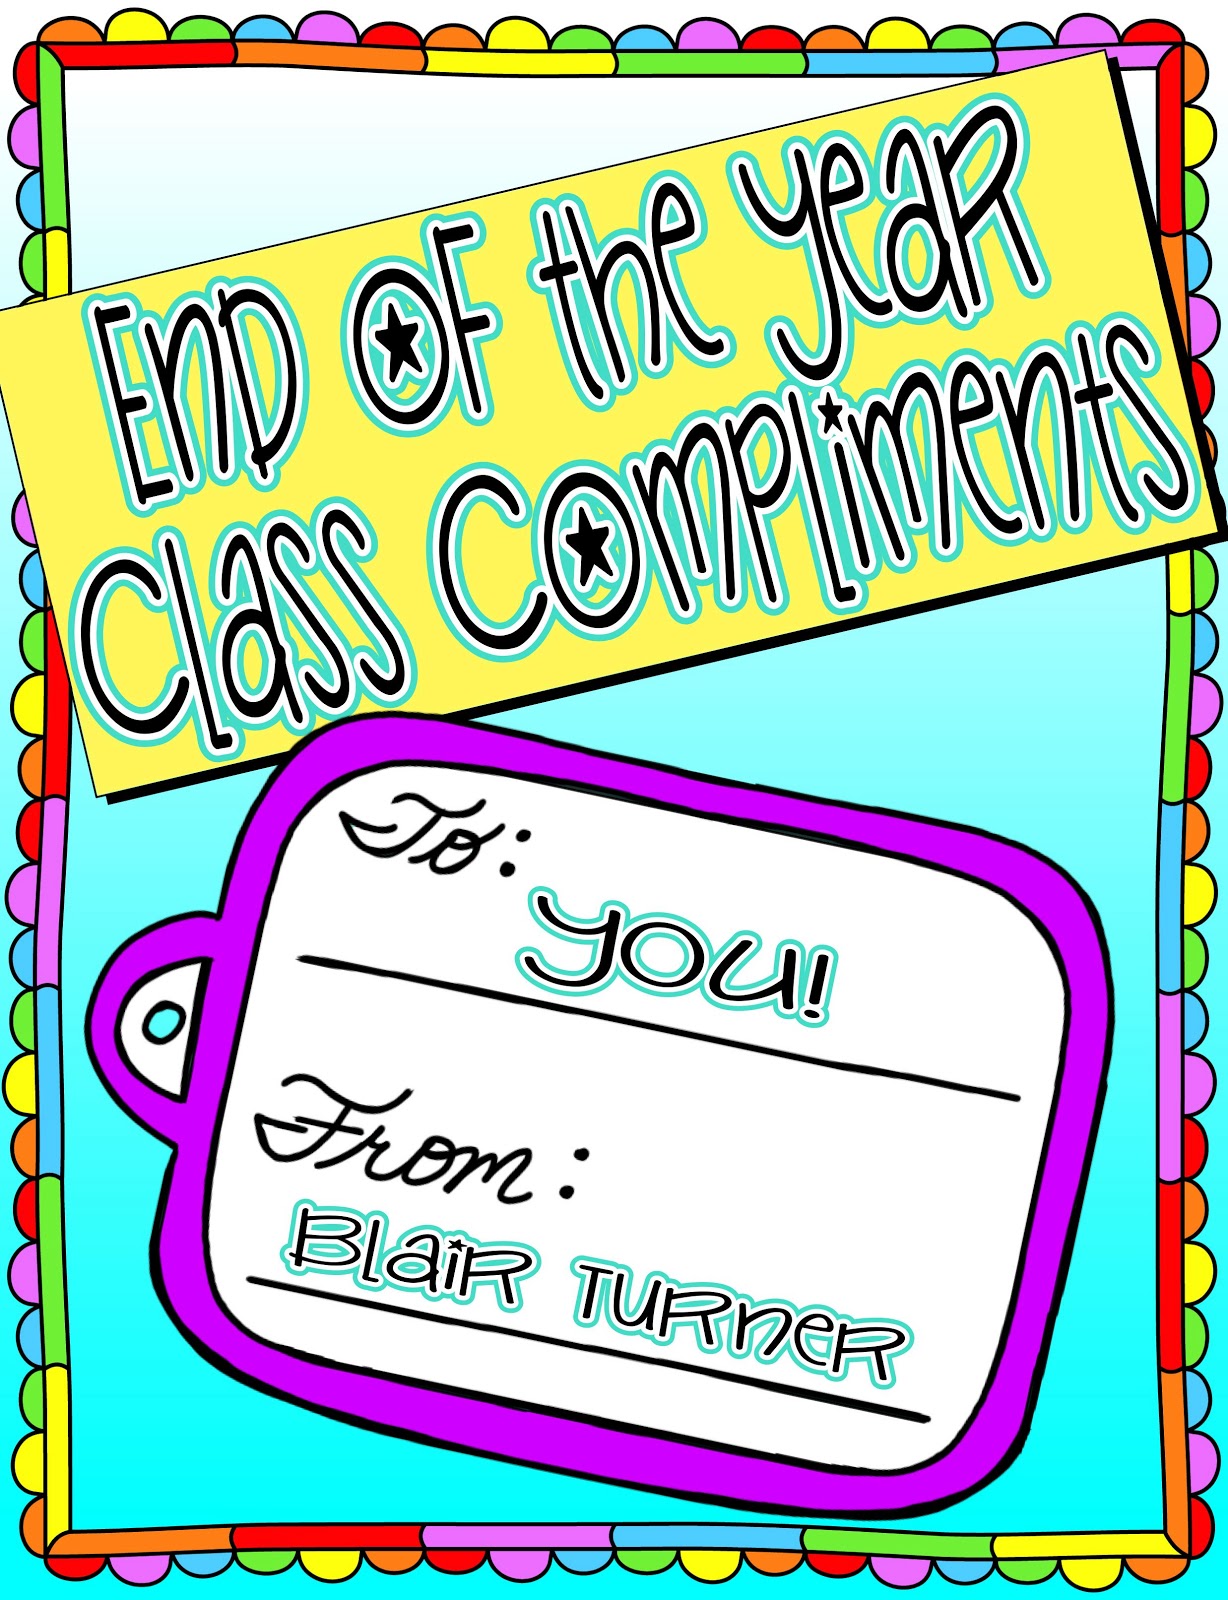 End Of School Year Clip Art - ClipArt Best - Cliparts.co